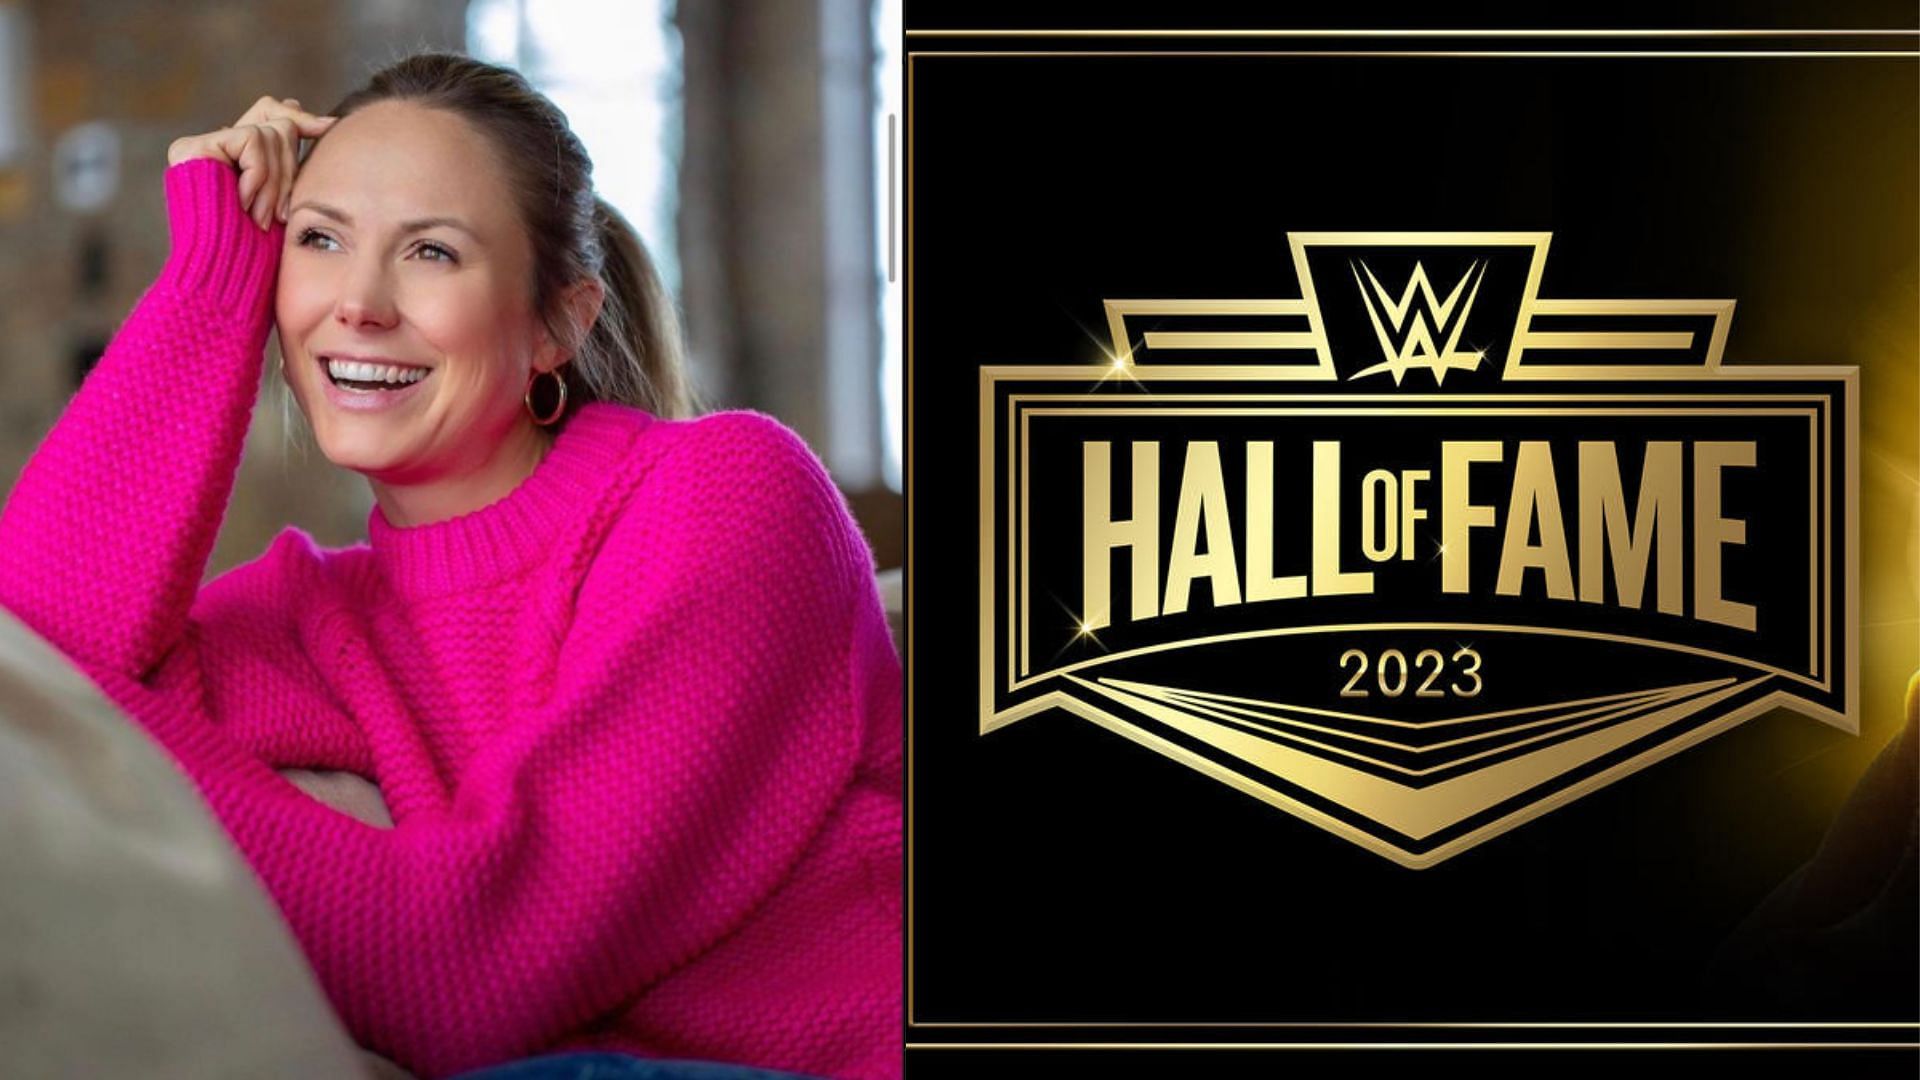 Stacy Keibler is reported to be the next WWE Hall of Famer